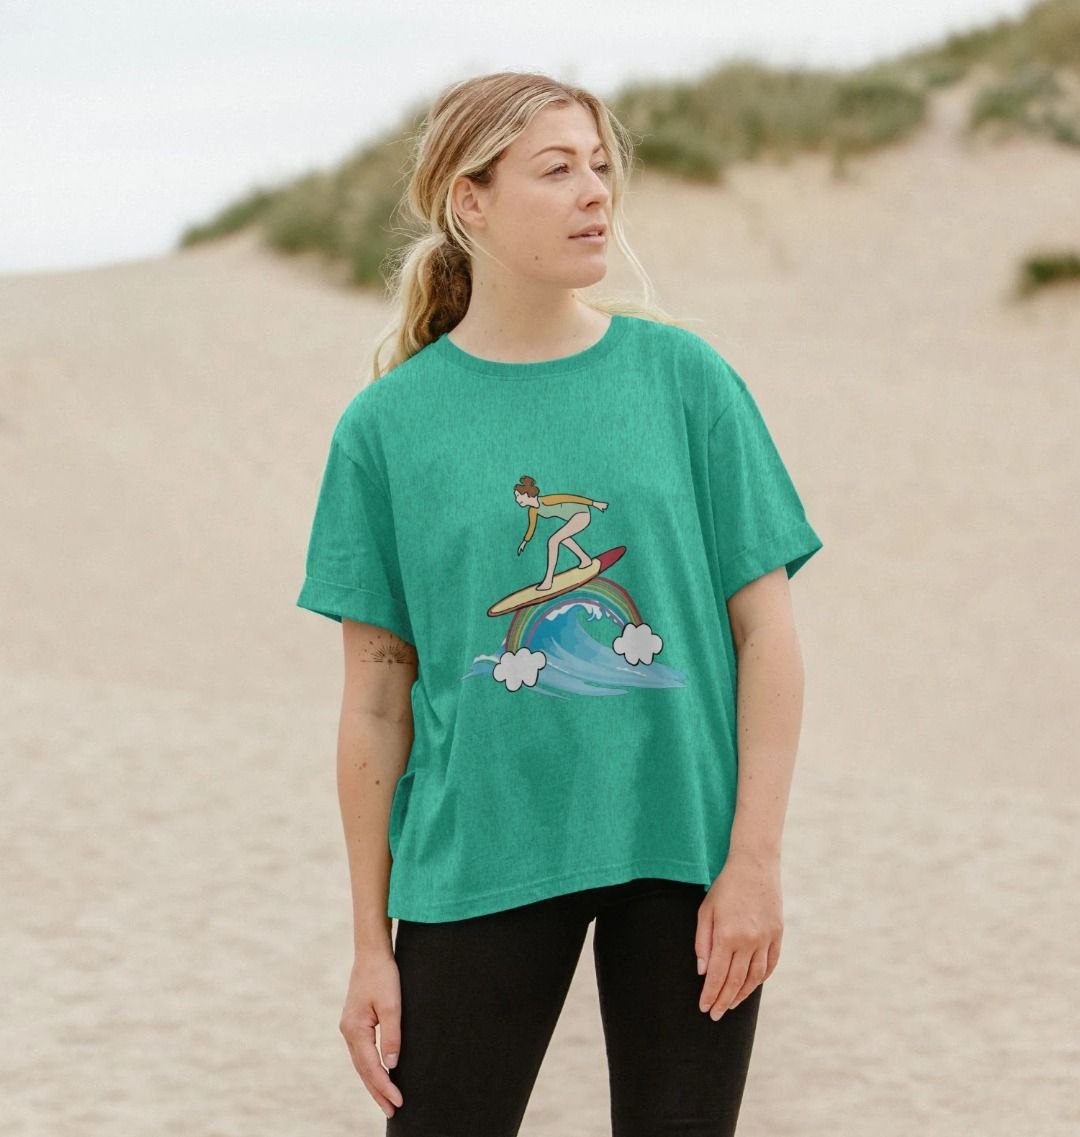 'SURF THE RAINBOW' Recycled Relaxed Fit Ladies Tee